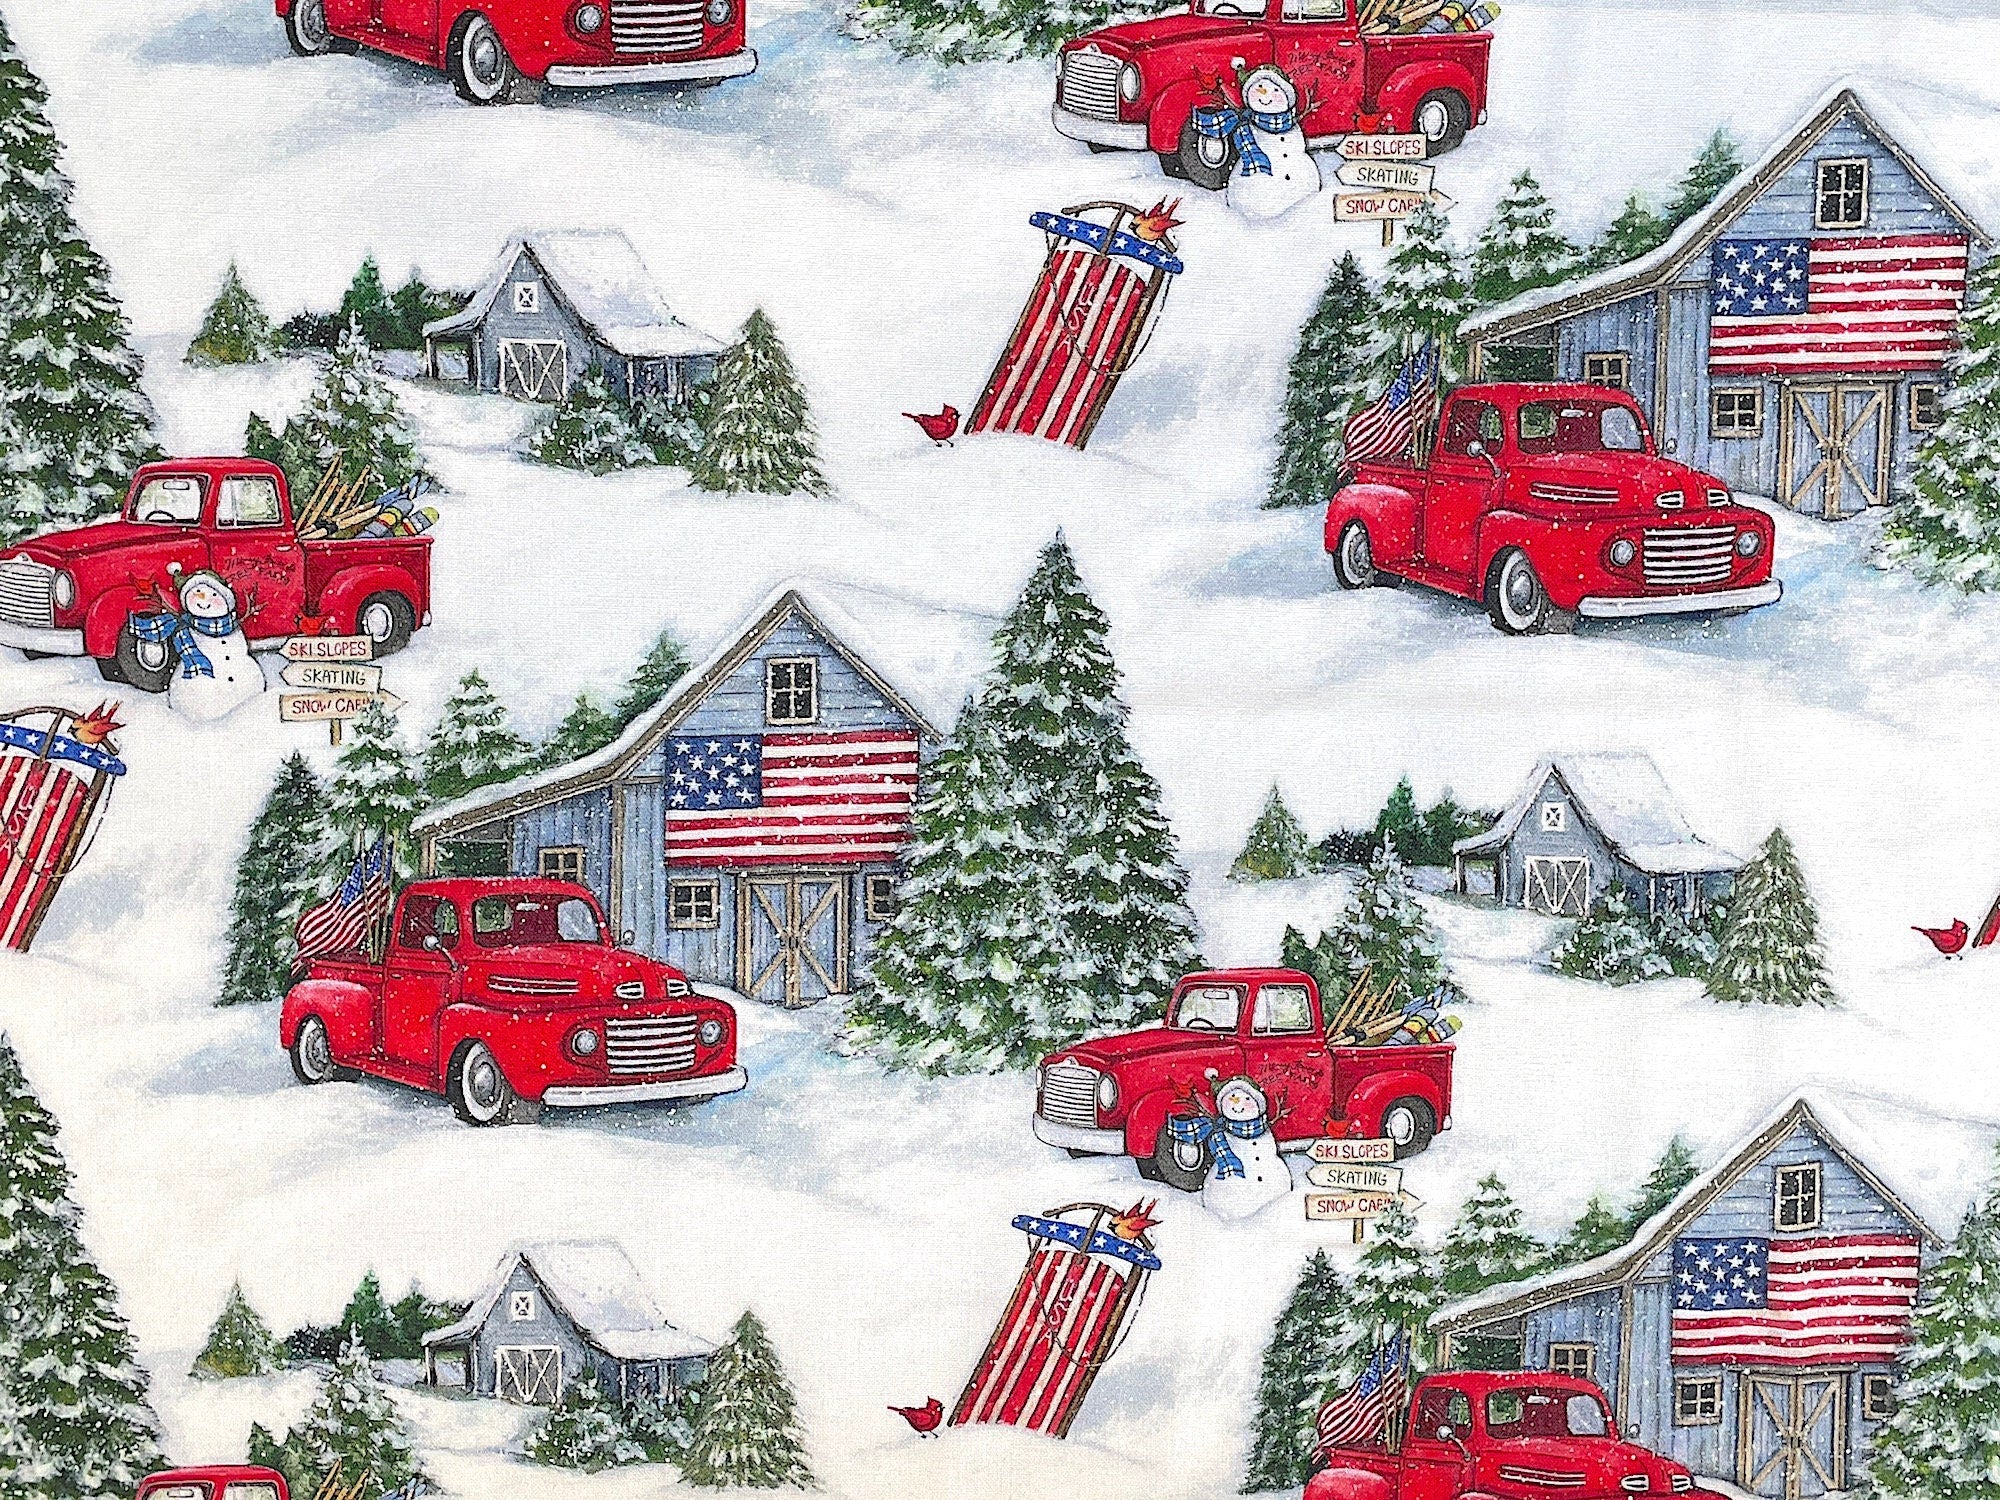 This fabric is snow covered and has red trucks, barns, snow covered trees, sleds and more. There are USA flags on the barns.